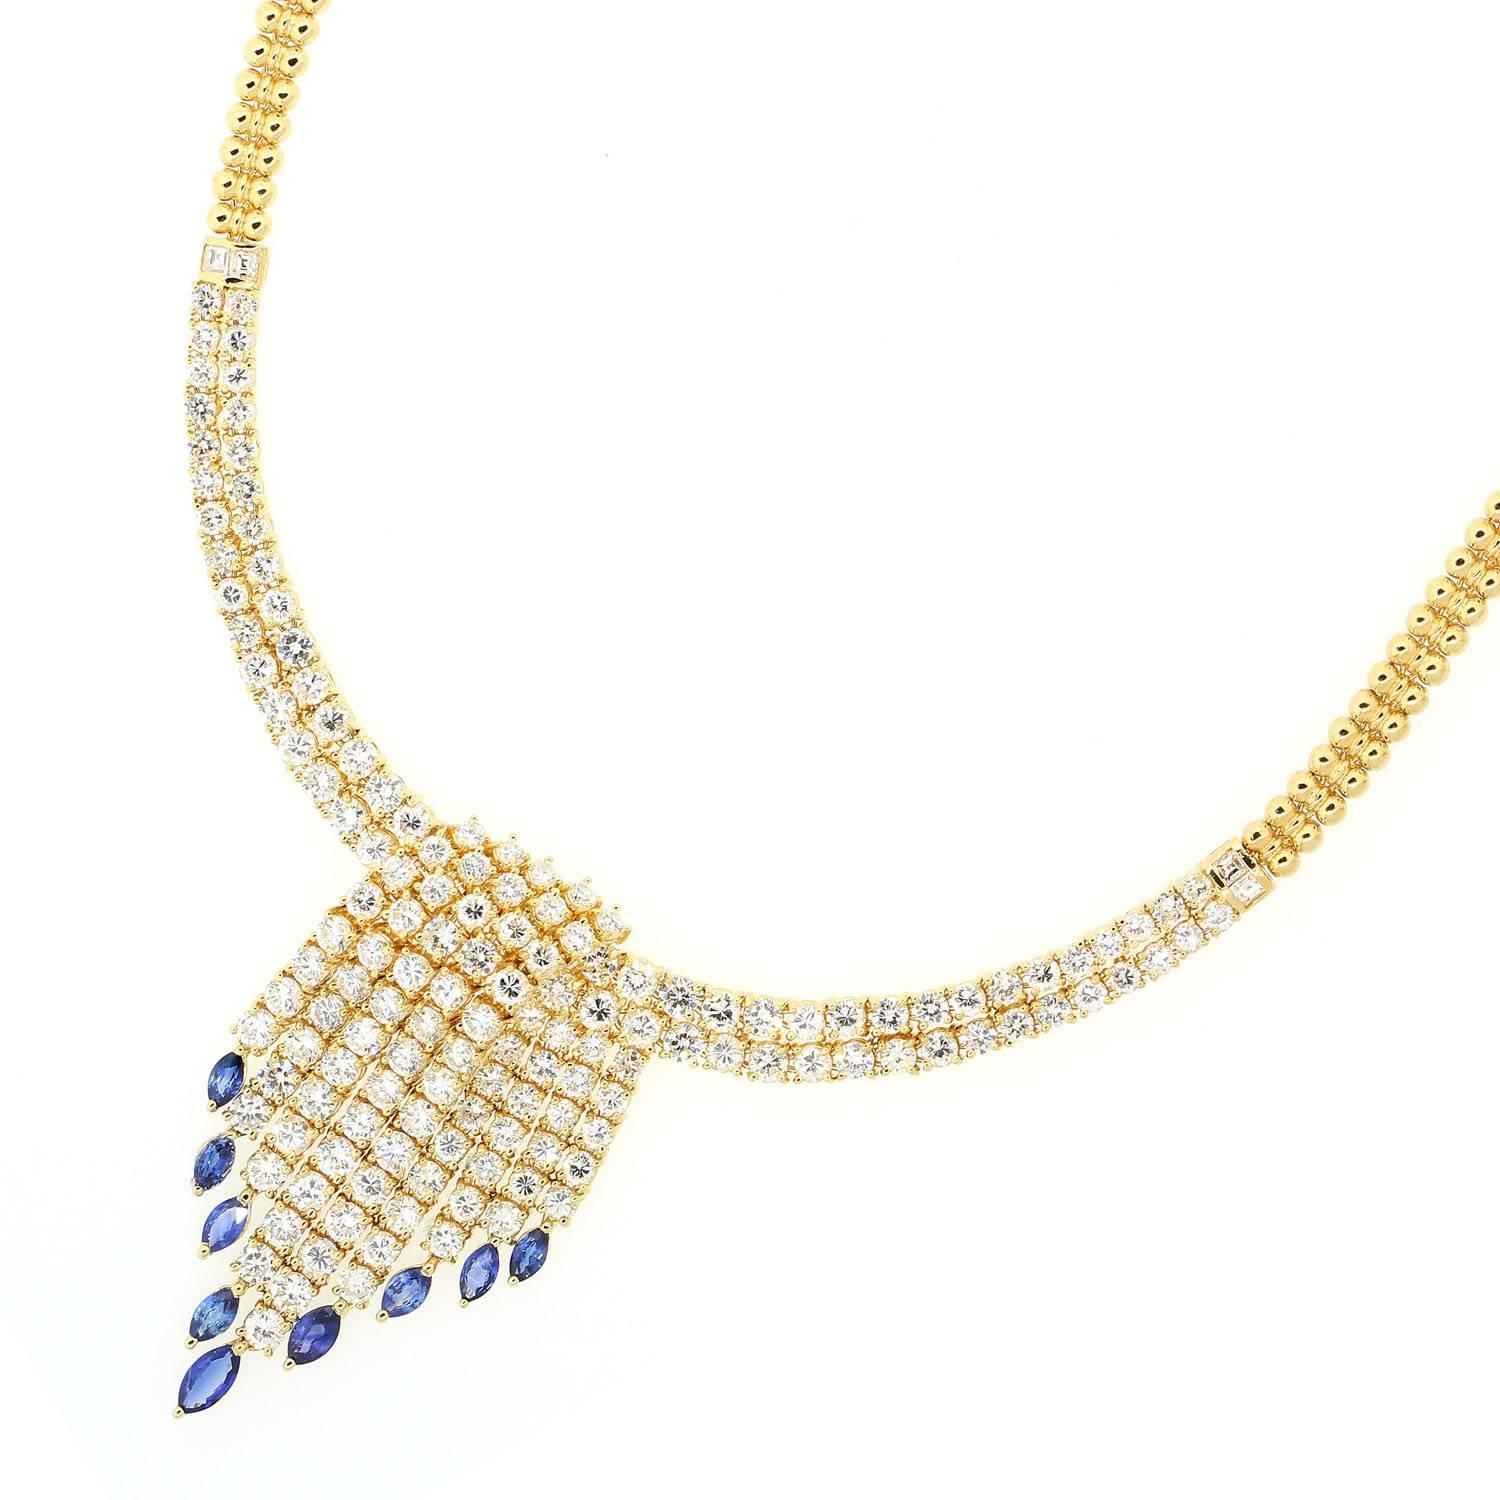 A tassel design 18KT yellow gold necklace with 16.95 carats of sparkly Round Brilliant Cut Diamonds.  This unique necklace features cascading Diamonds dropping  3.05 carats of Blue Sapphires.  The necklace has a 